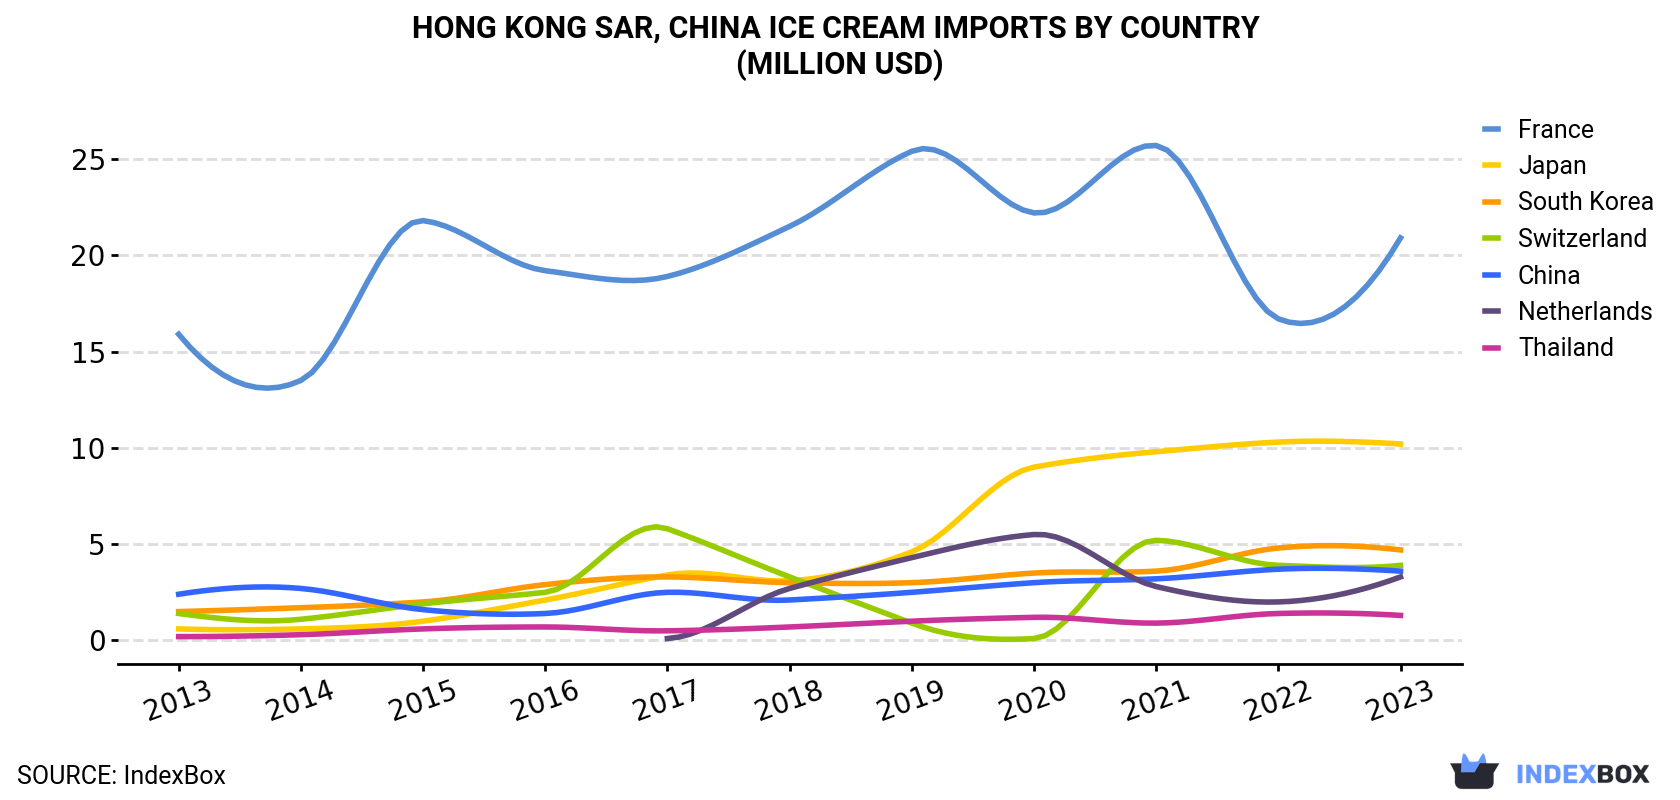 Hong Kong Ice Cream Imports By Country (Million USD)